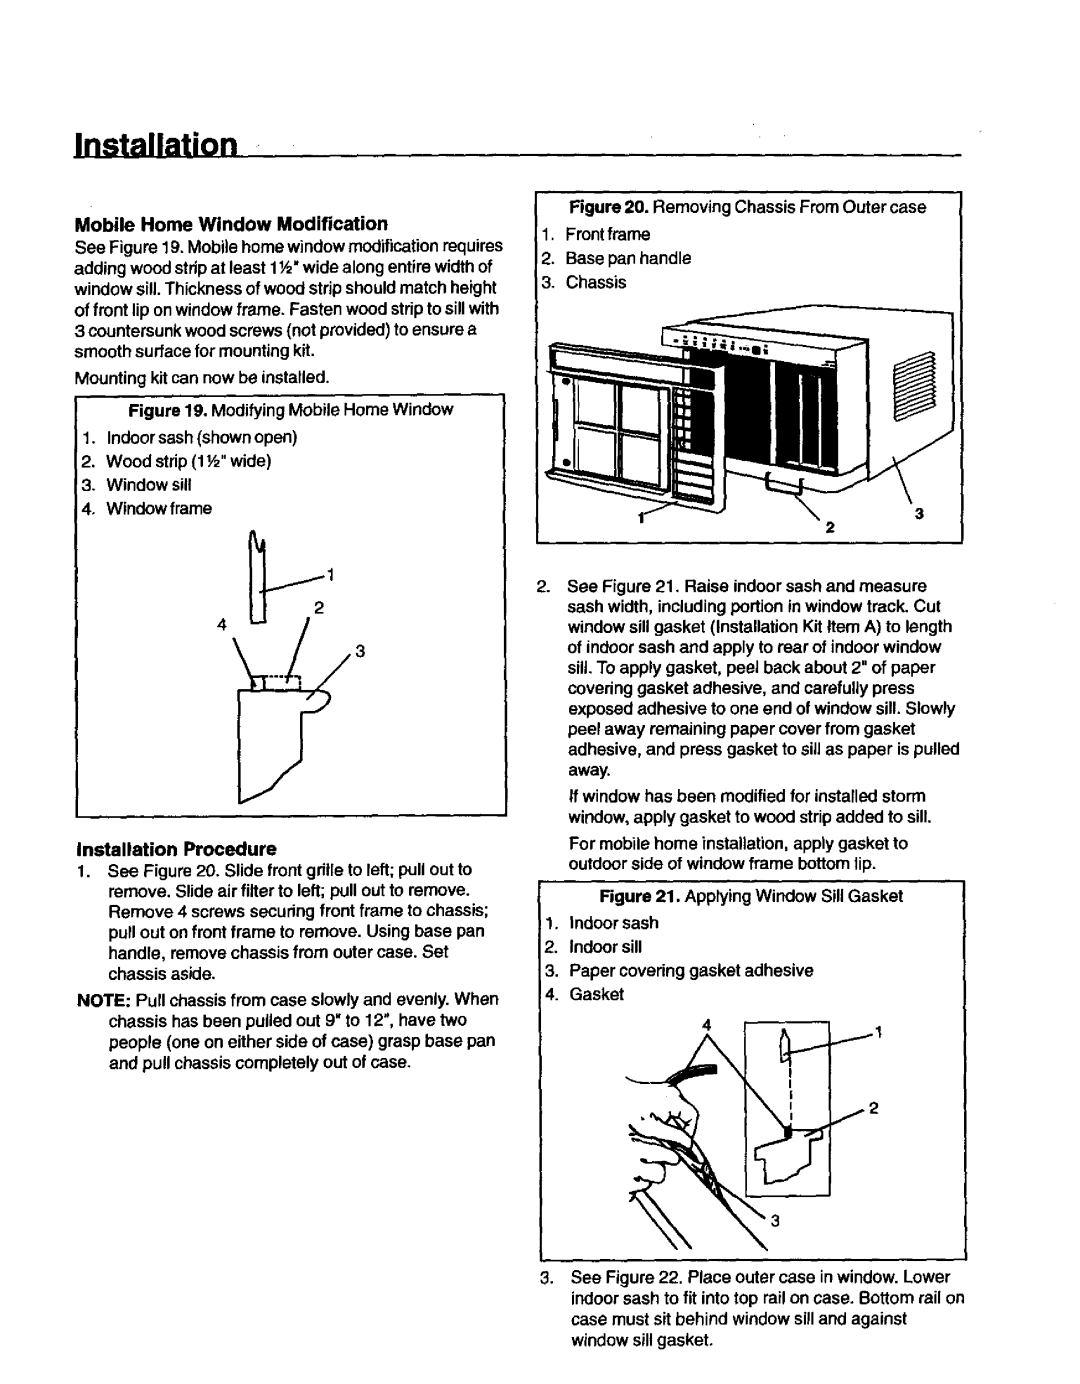 Kenmore 70089, 78189, 70129, 78079 owner manual Installation, Mobile Home Window Modification 